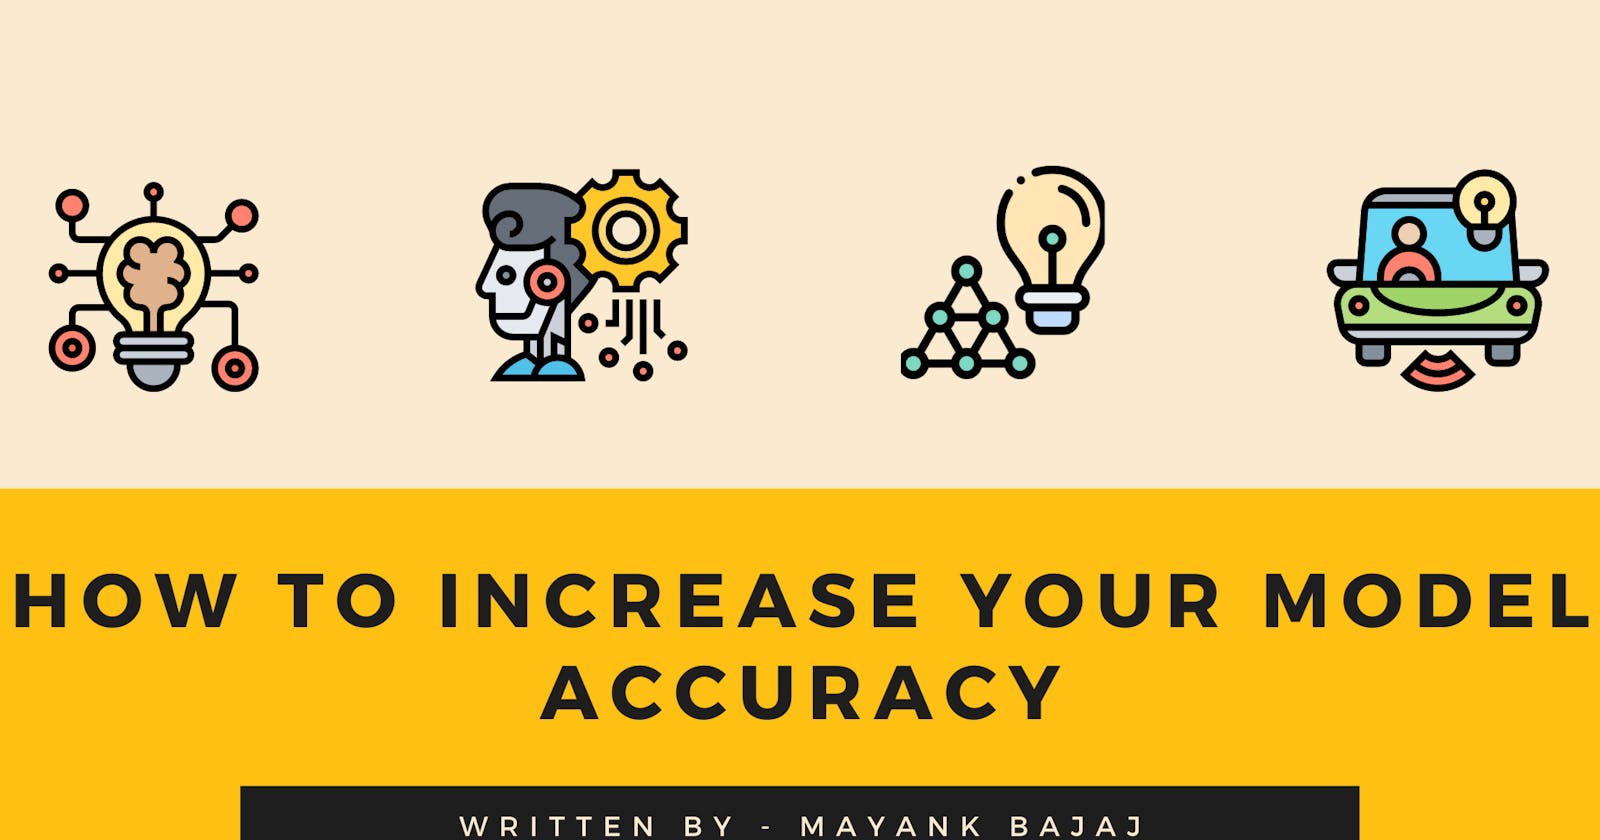 How To Increase Your Model Accuracy